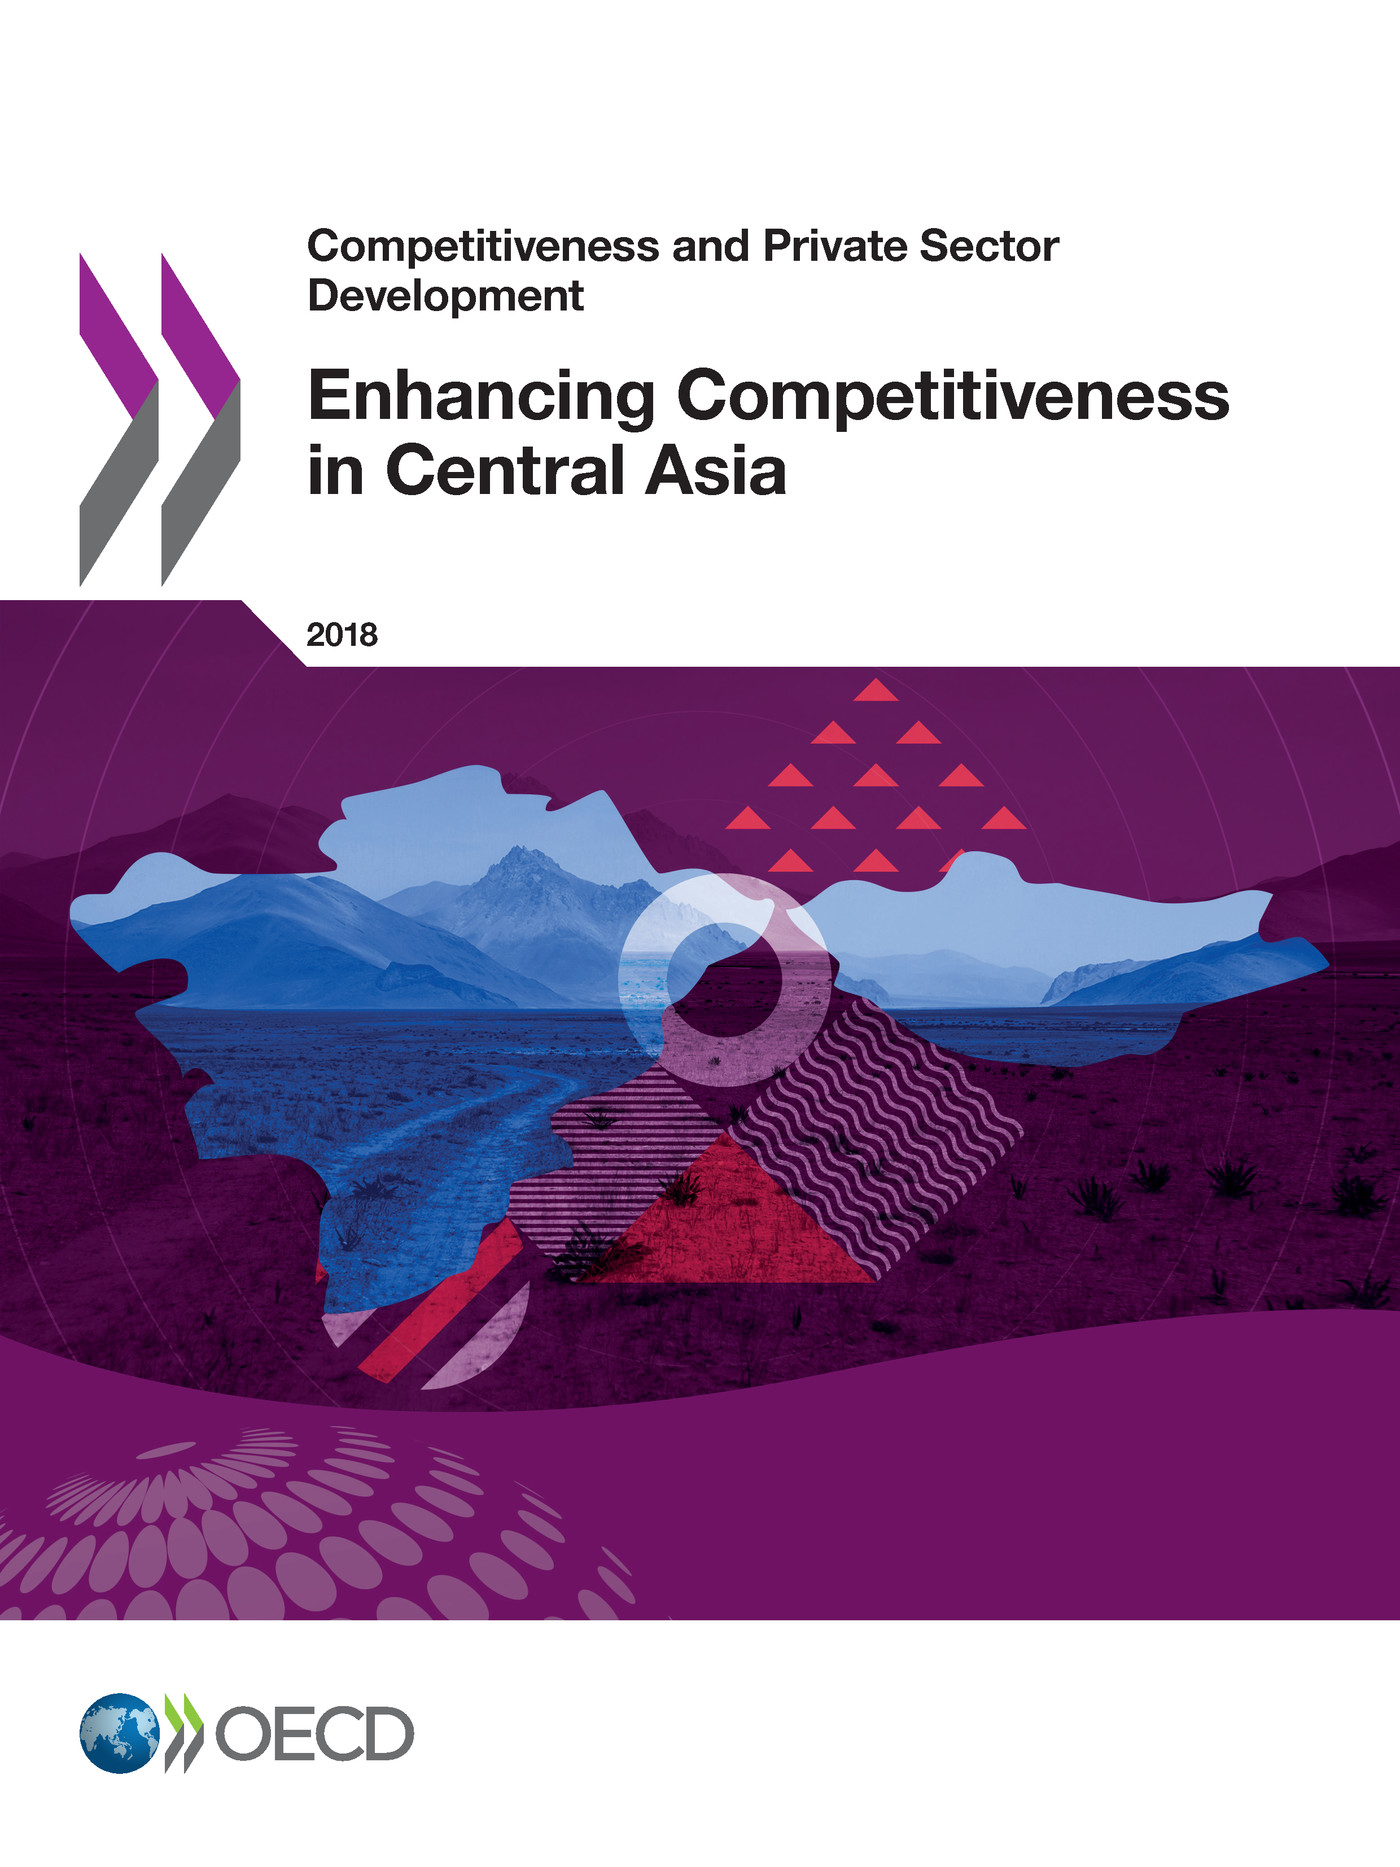 Enhancing Competitiveness in Central Asia -  Collectif - OCDE / OECD